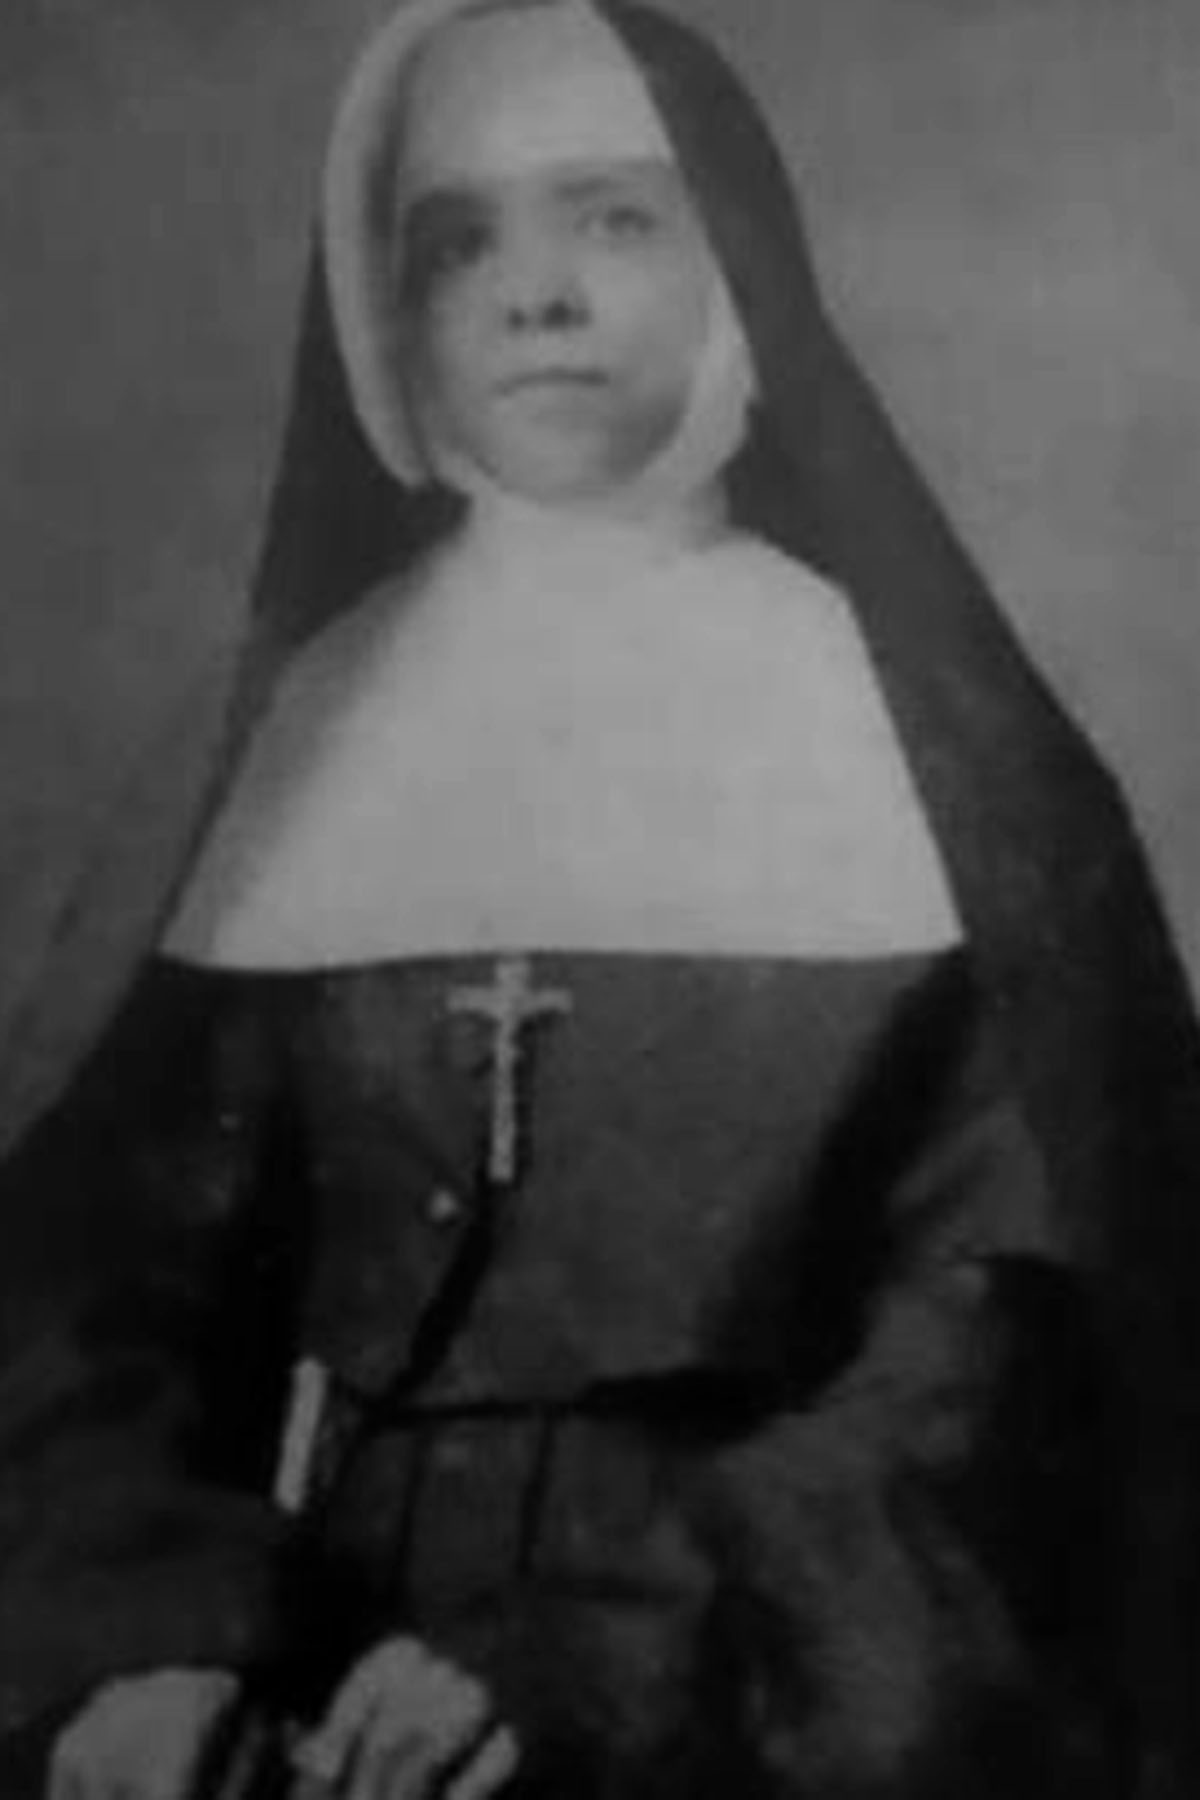 Photograph of Sister Marie Seraphine